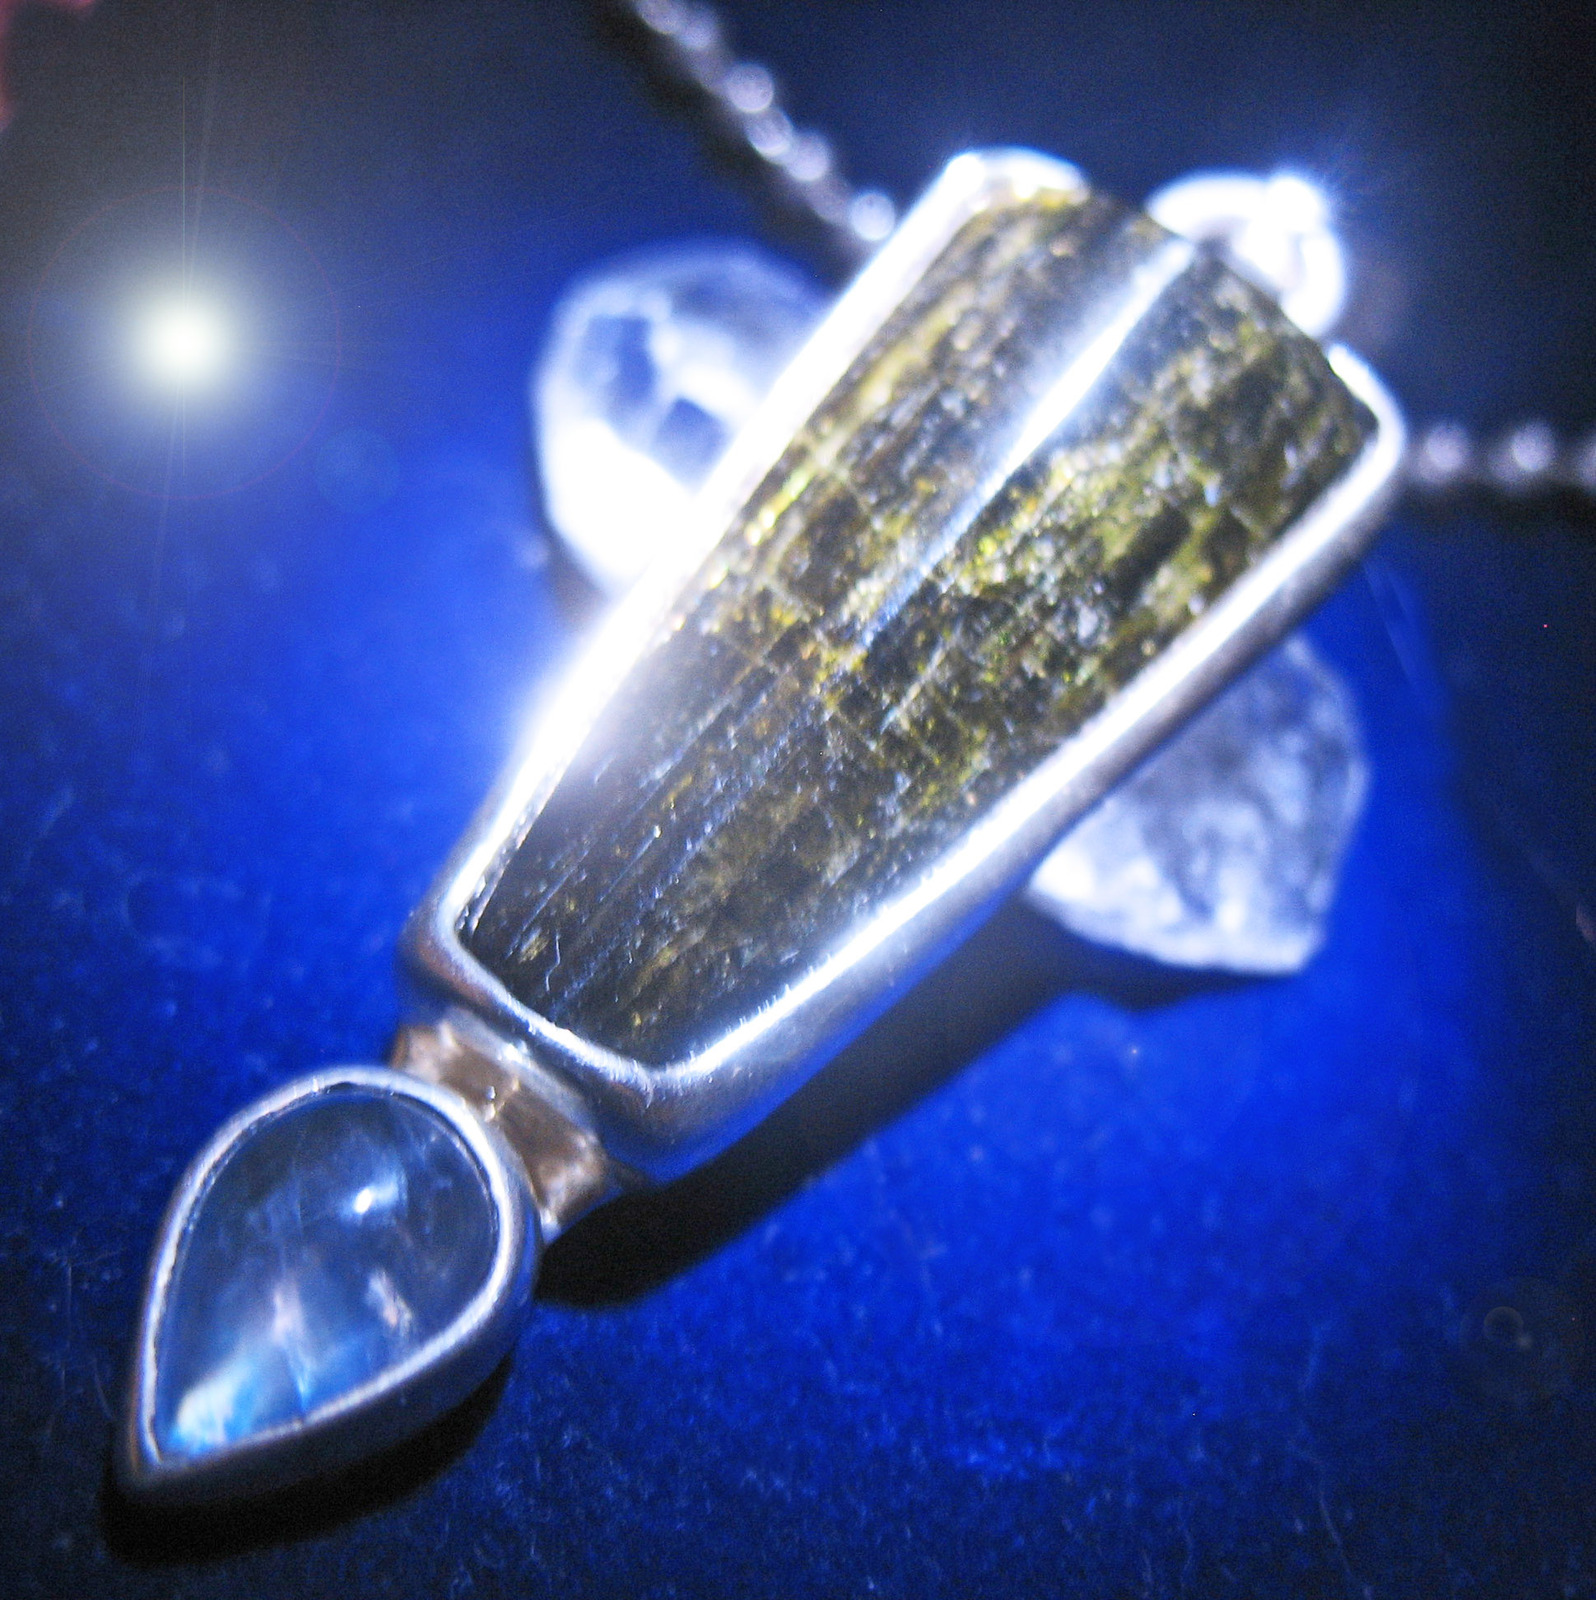 HAUNTED NECKLACE GOLDEN STAR MAINTAIN HIGHEST POWER OFFERS MAGICK 925 7 SCHOLARS - $89,007.77